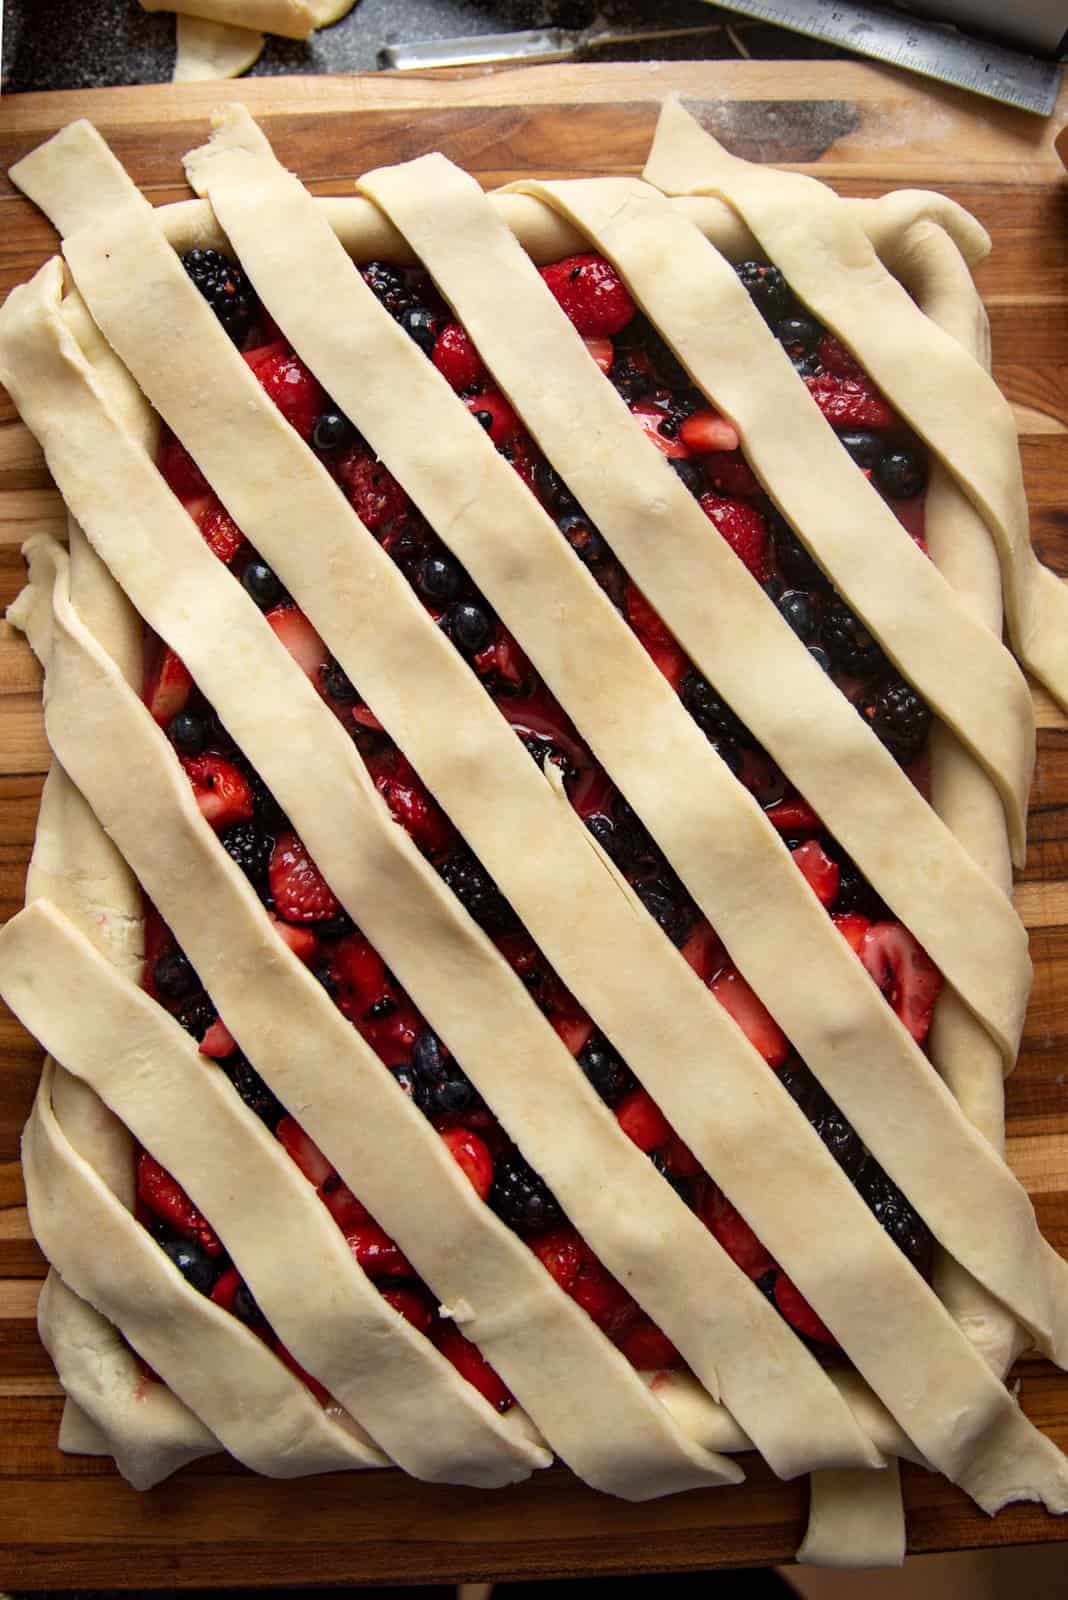 An overhead view of a partially completed lattice crust, with crust placed in one direction.